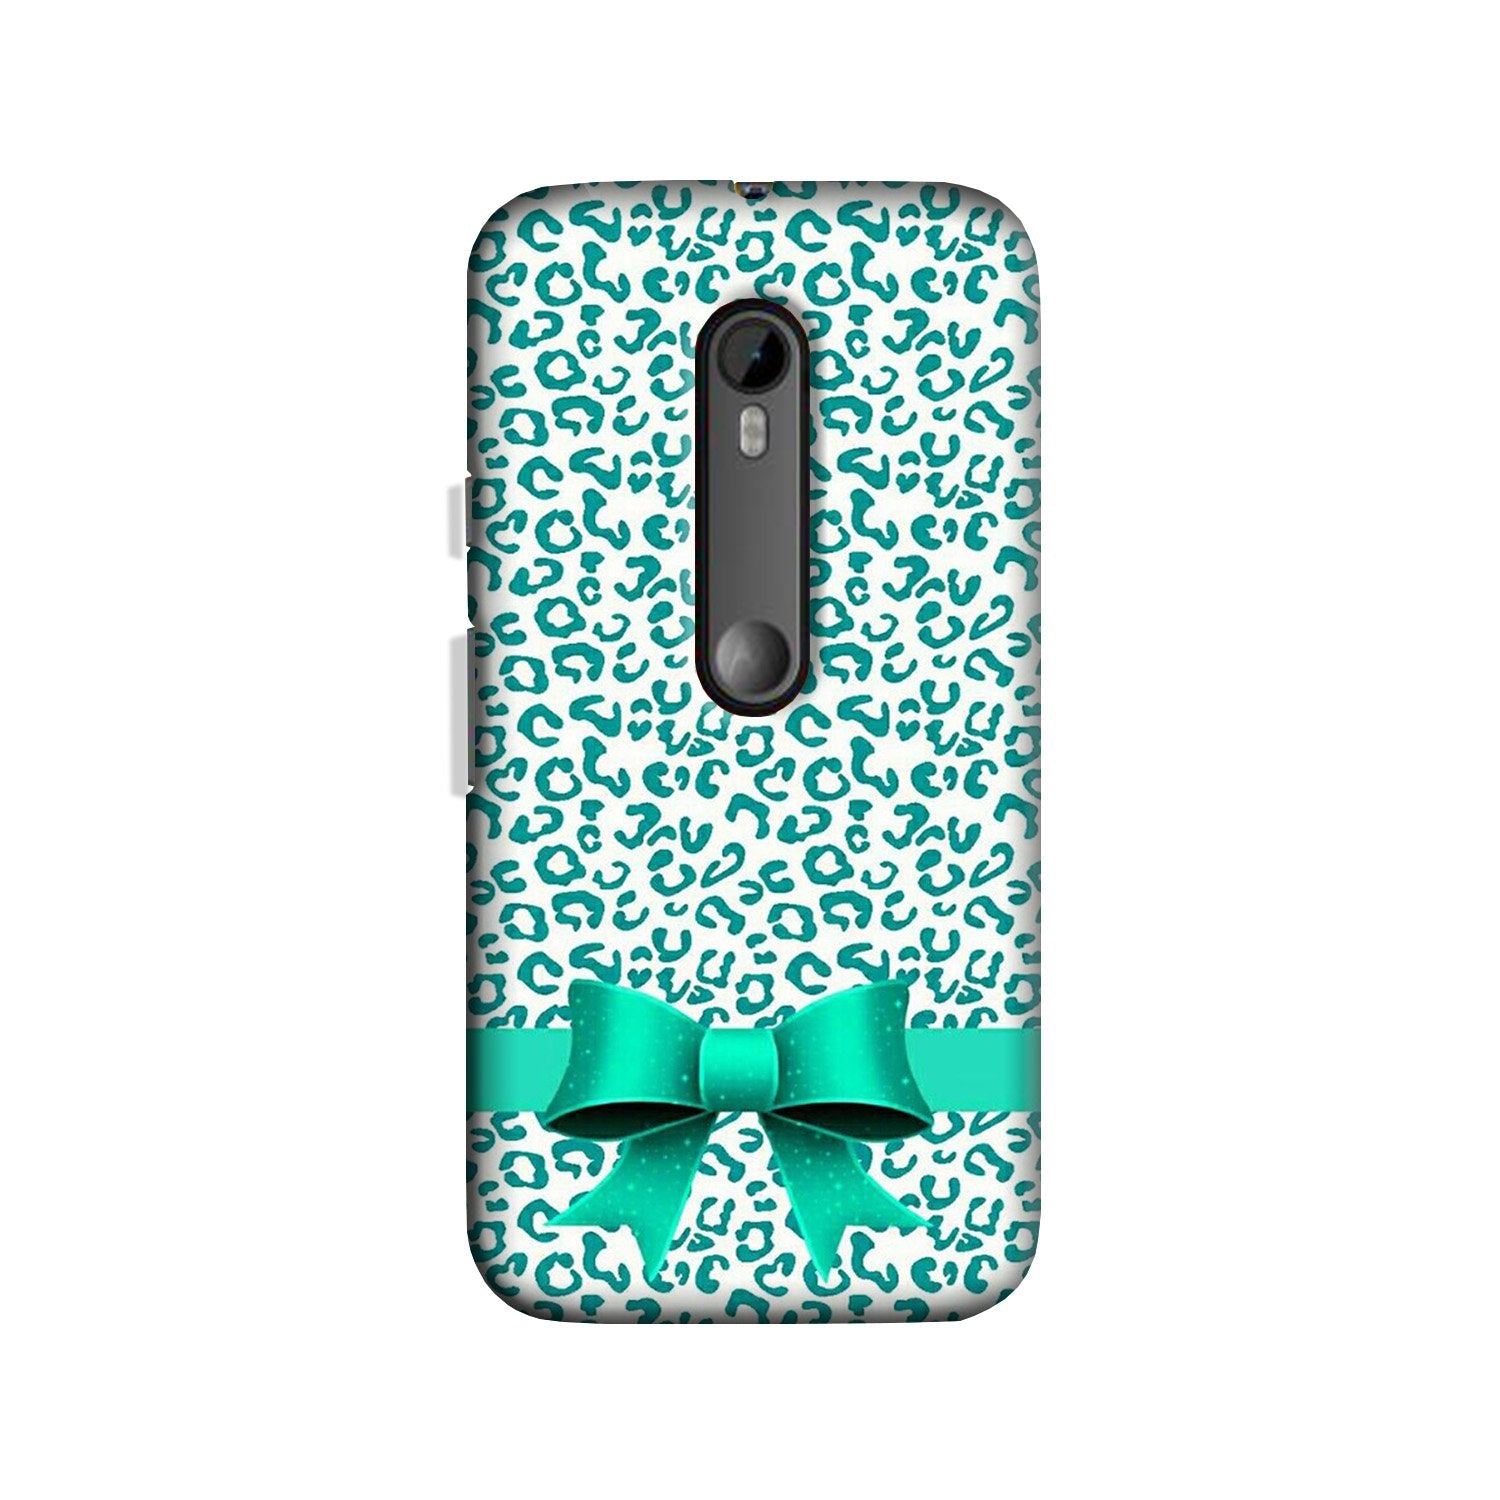 Gift Wrap6 Case for Moto X Force